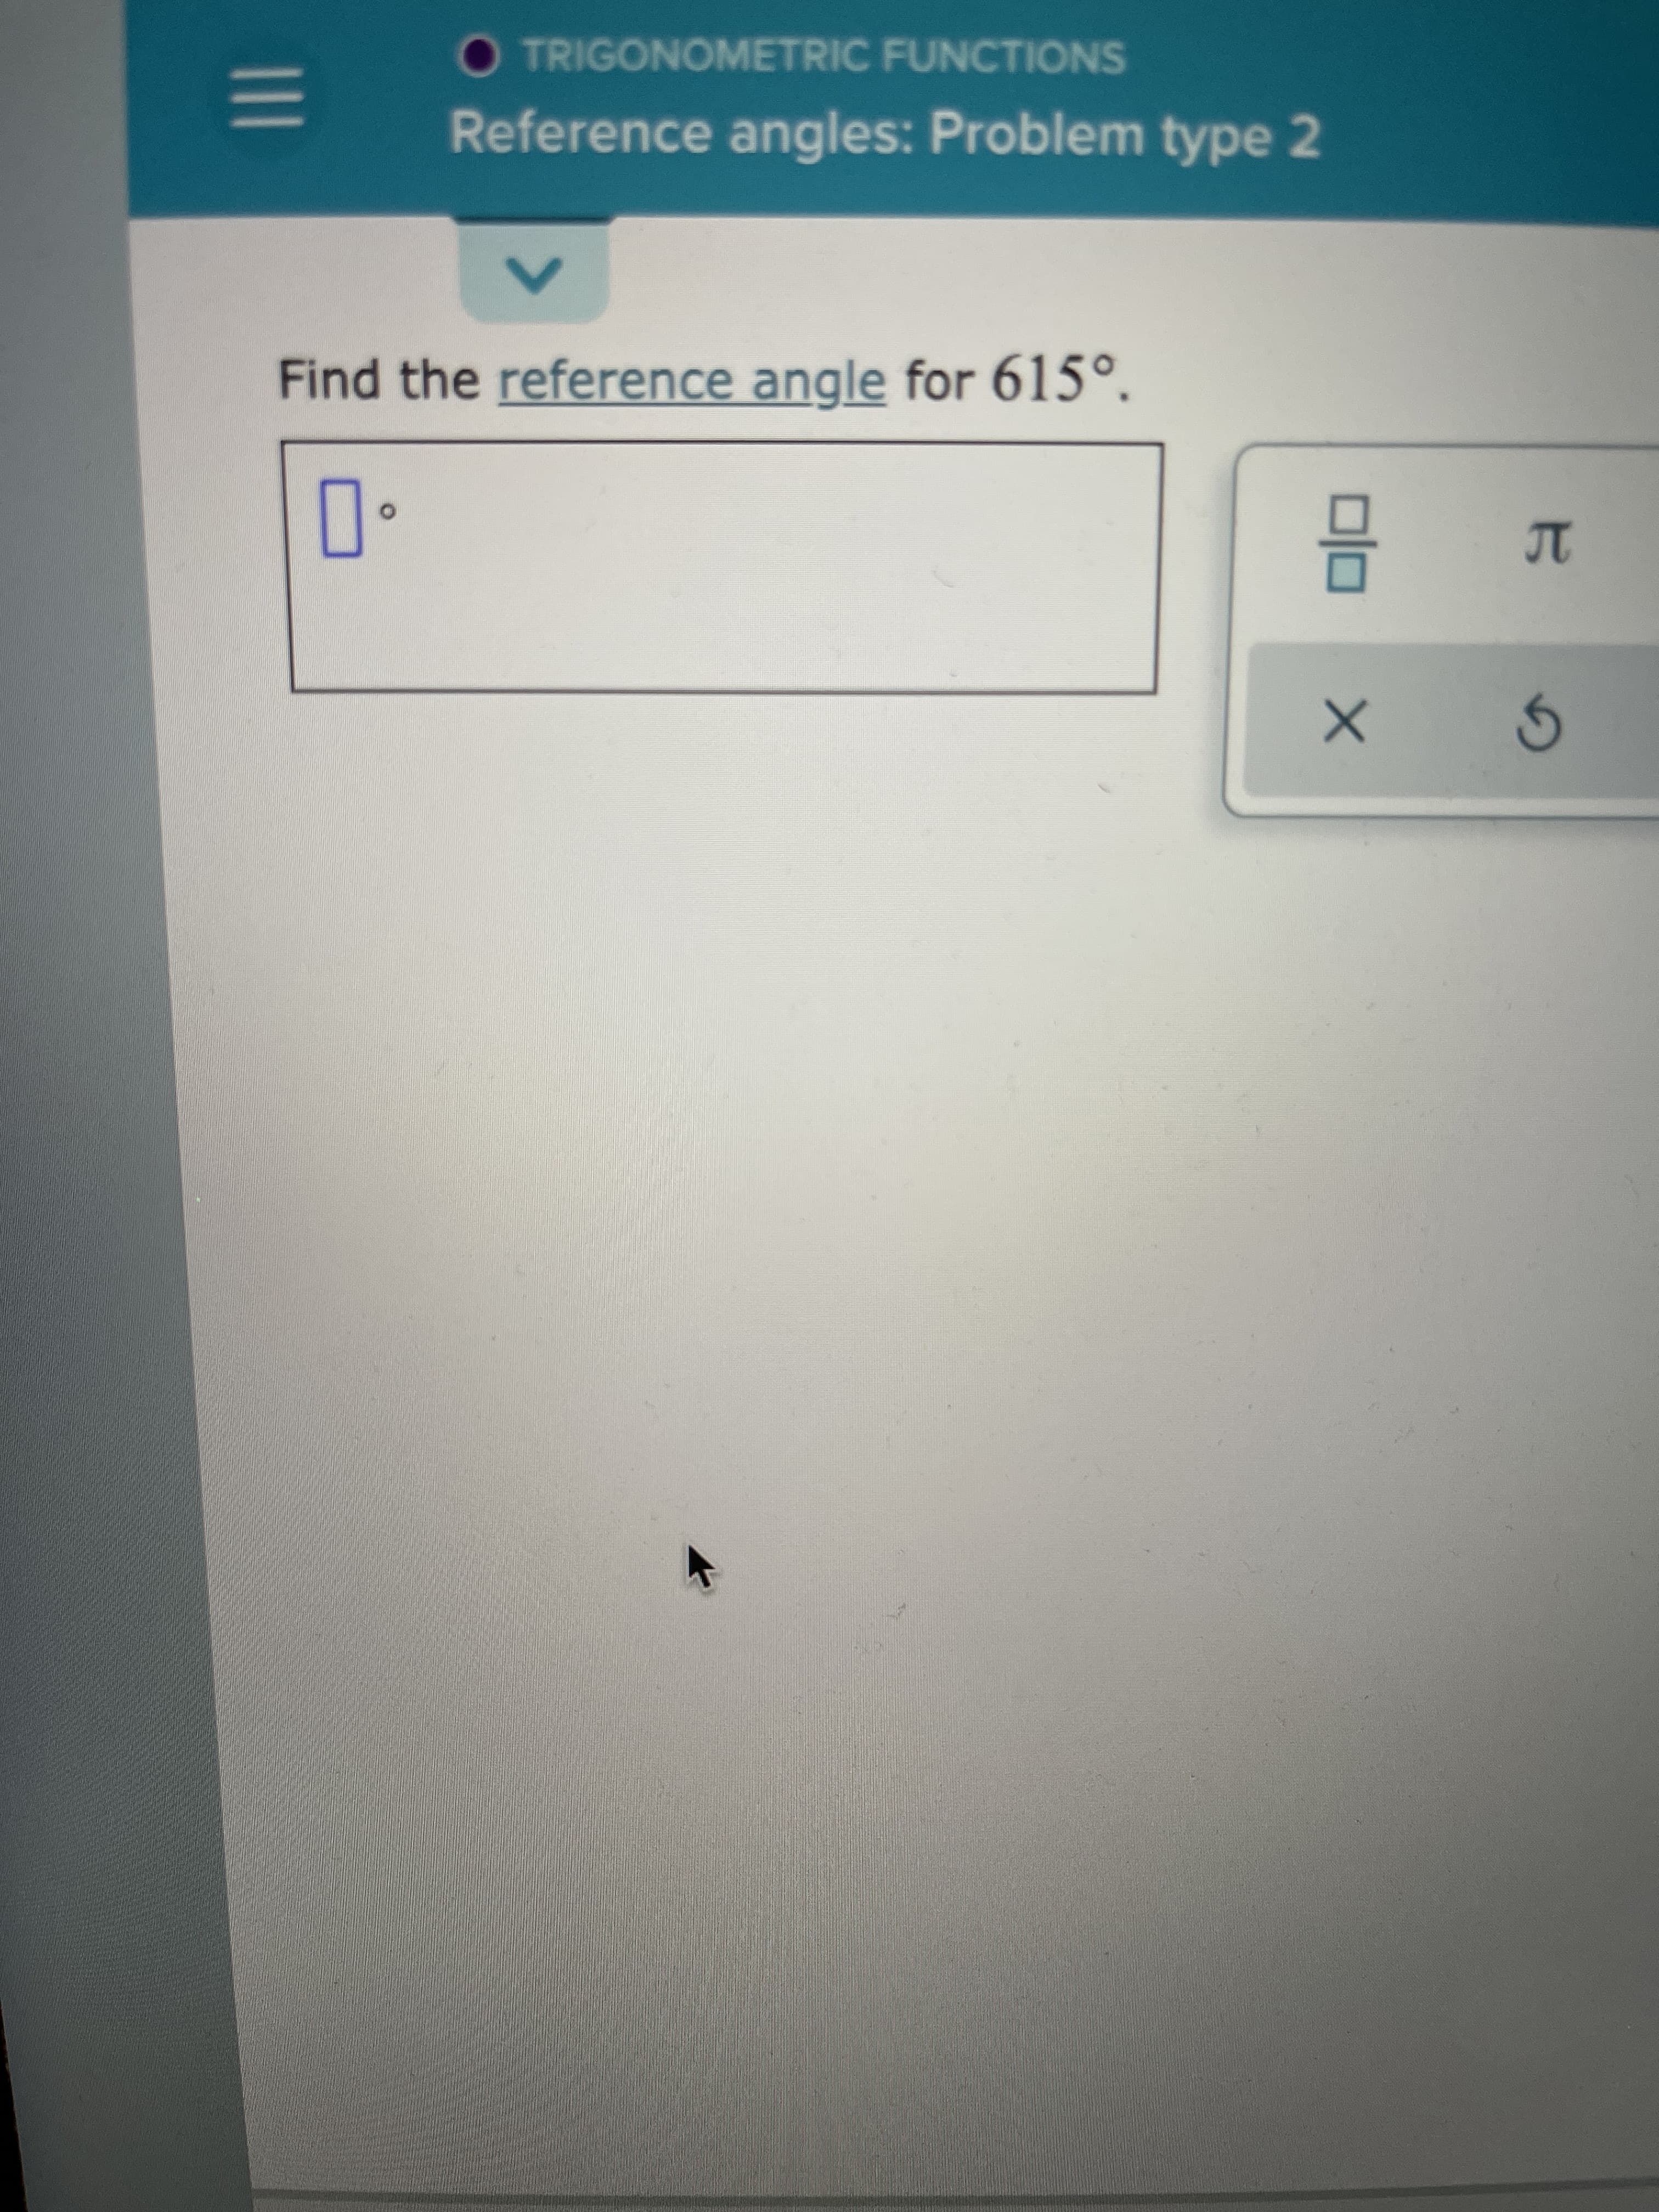 Find the reference angle for 615°.
TC
15
